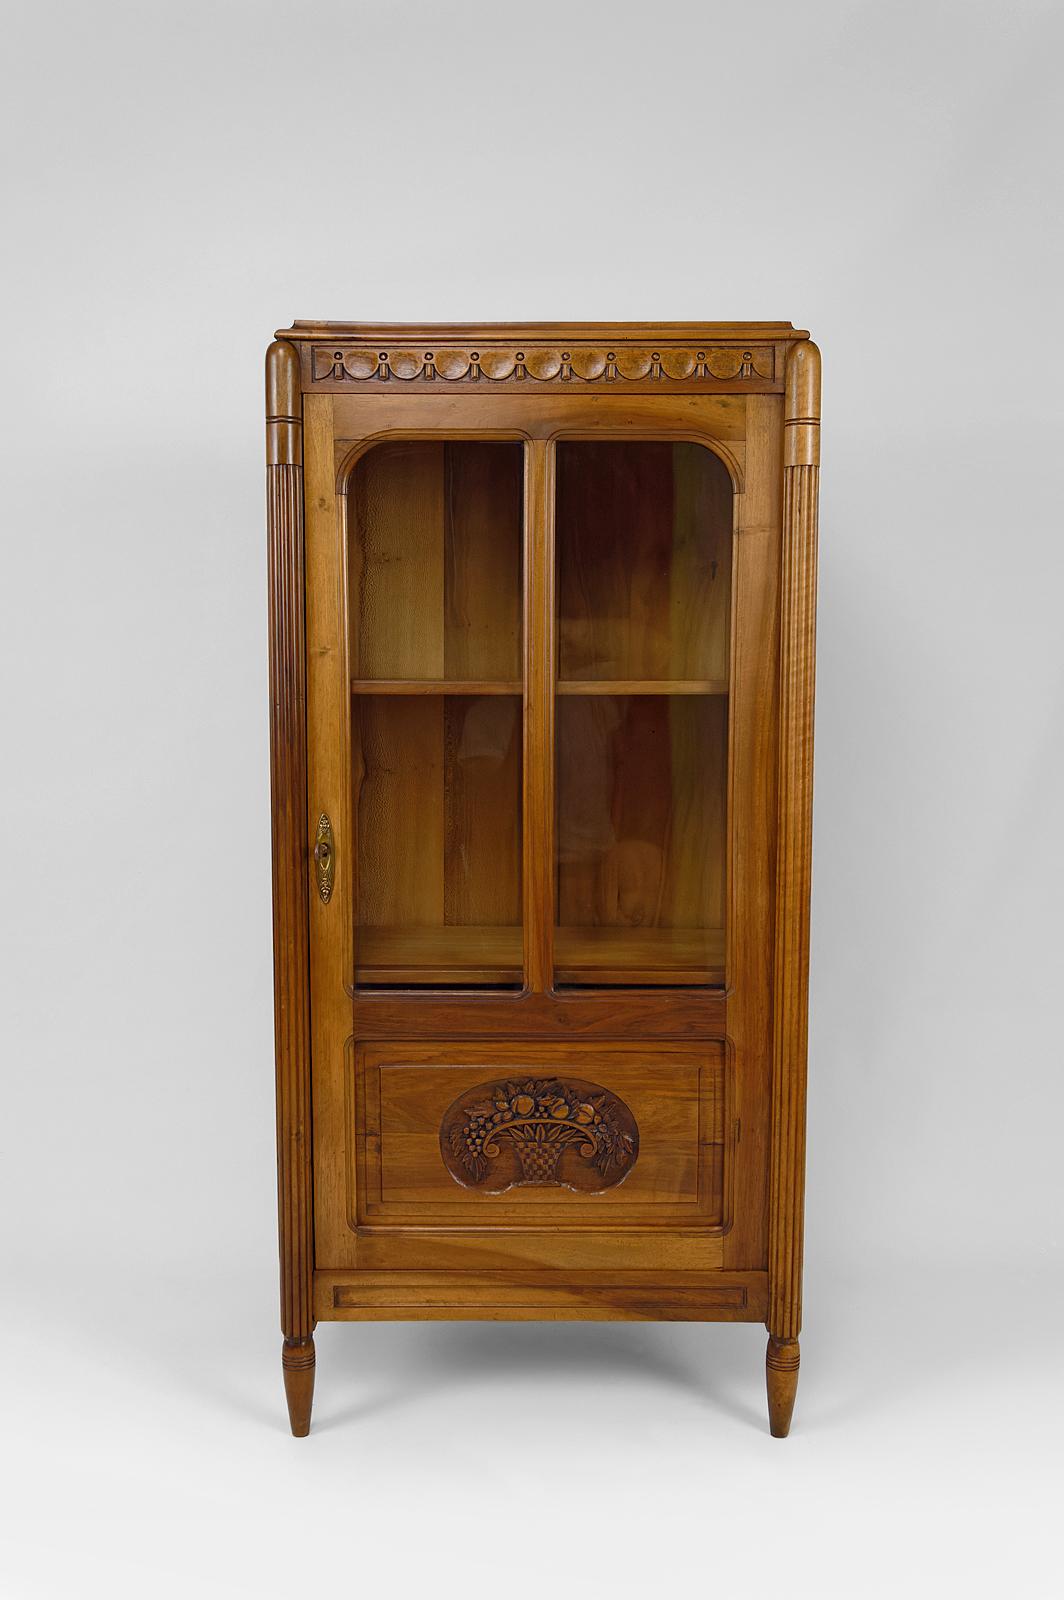 
Cabinet / display case / show case / bookcase with glass door, in walnut.

In the style of the productions of Follot, Dufrène.
Art Deco.
France, Circa 1920.

Carved fruit baskets on the door.
Pretty bronzes.
Fluted/tapered colonnades.

2